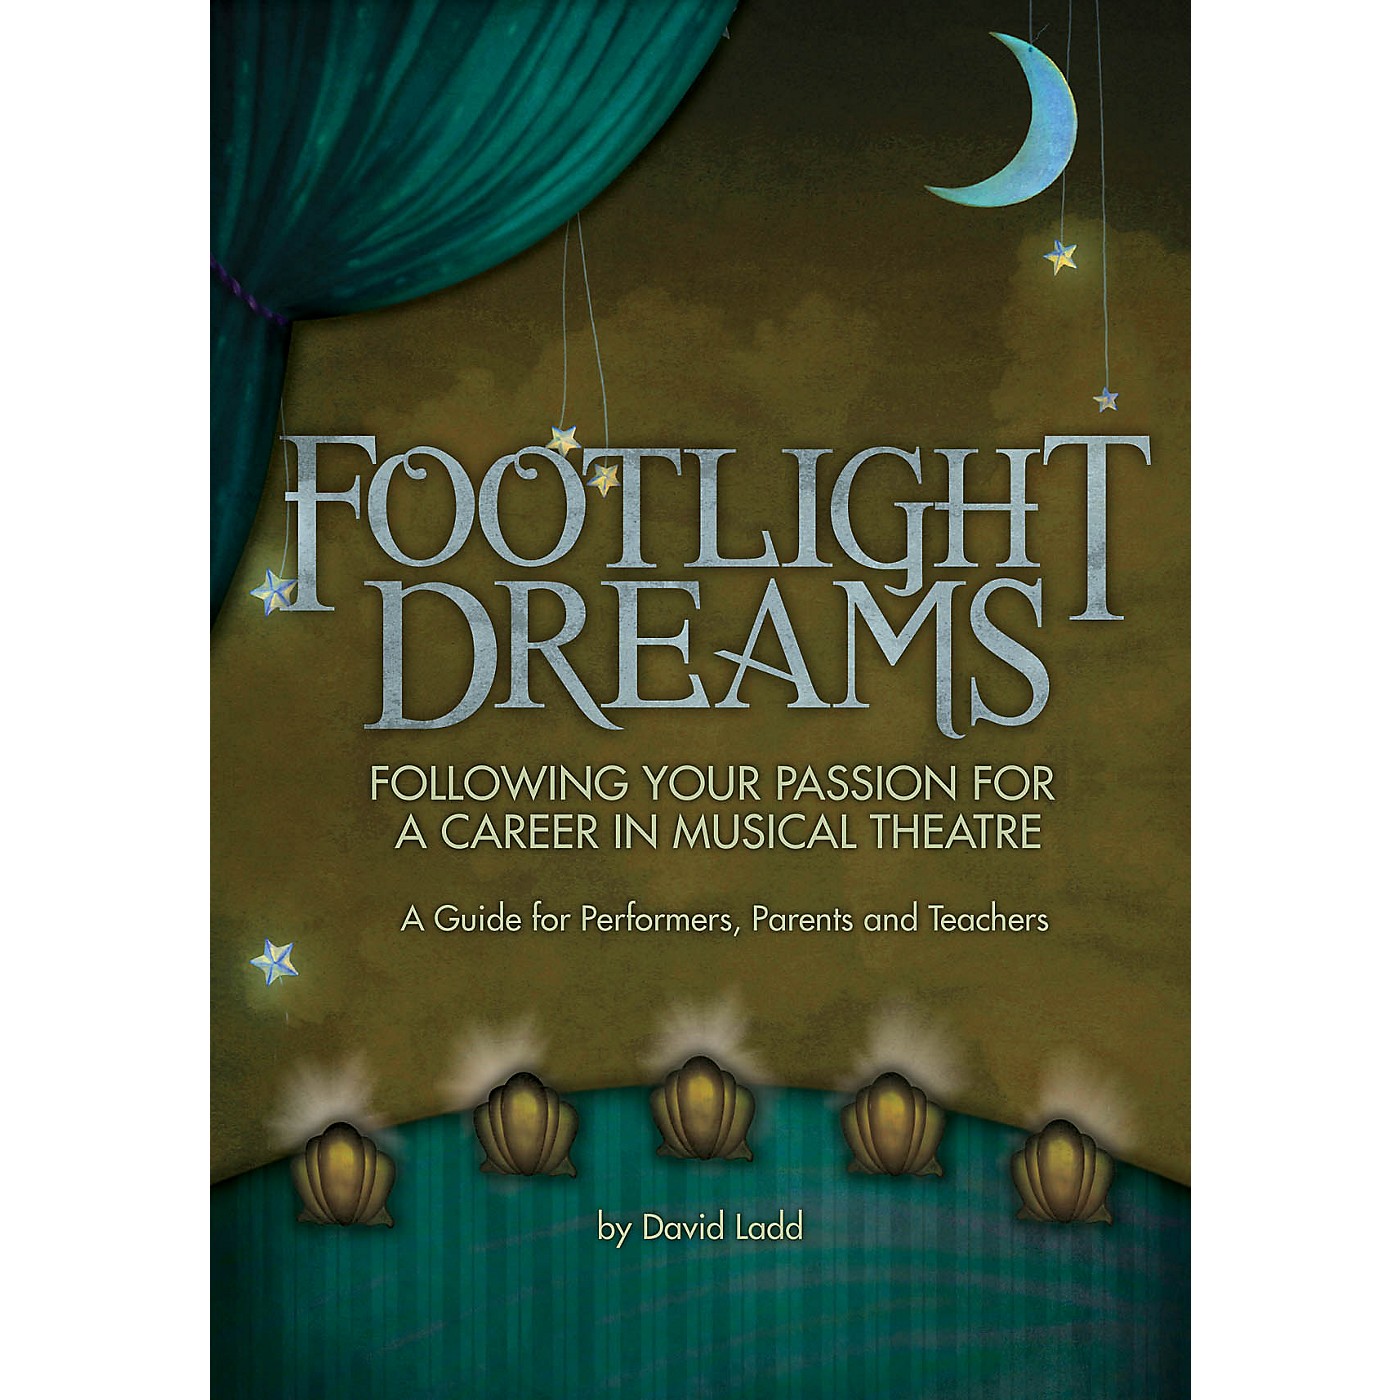 Hal Leonard Footlight Dreams (Following Your Passion for a Career in Musical Theatre) Book thumbnail